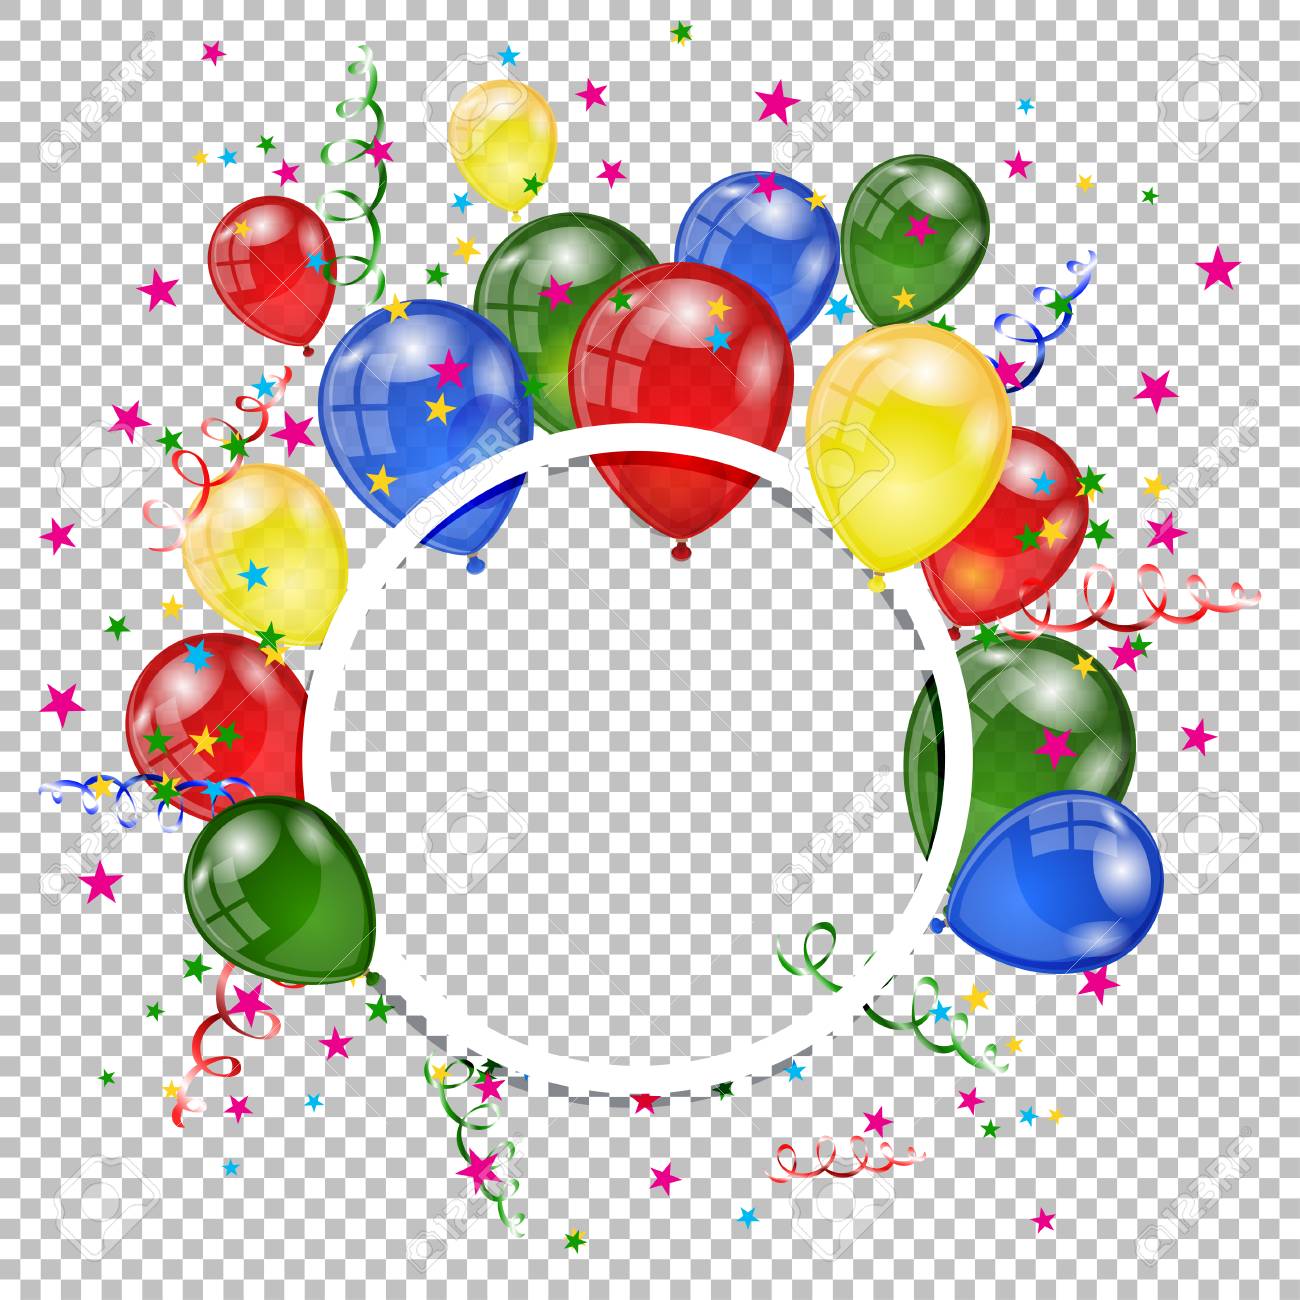 Balloons On A Transparent Background Ha Png Image Pngio